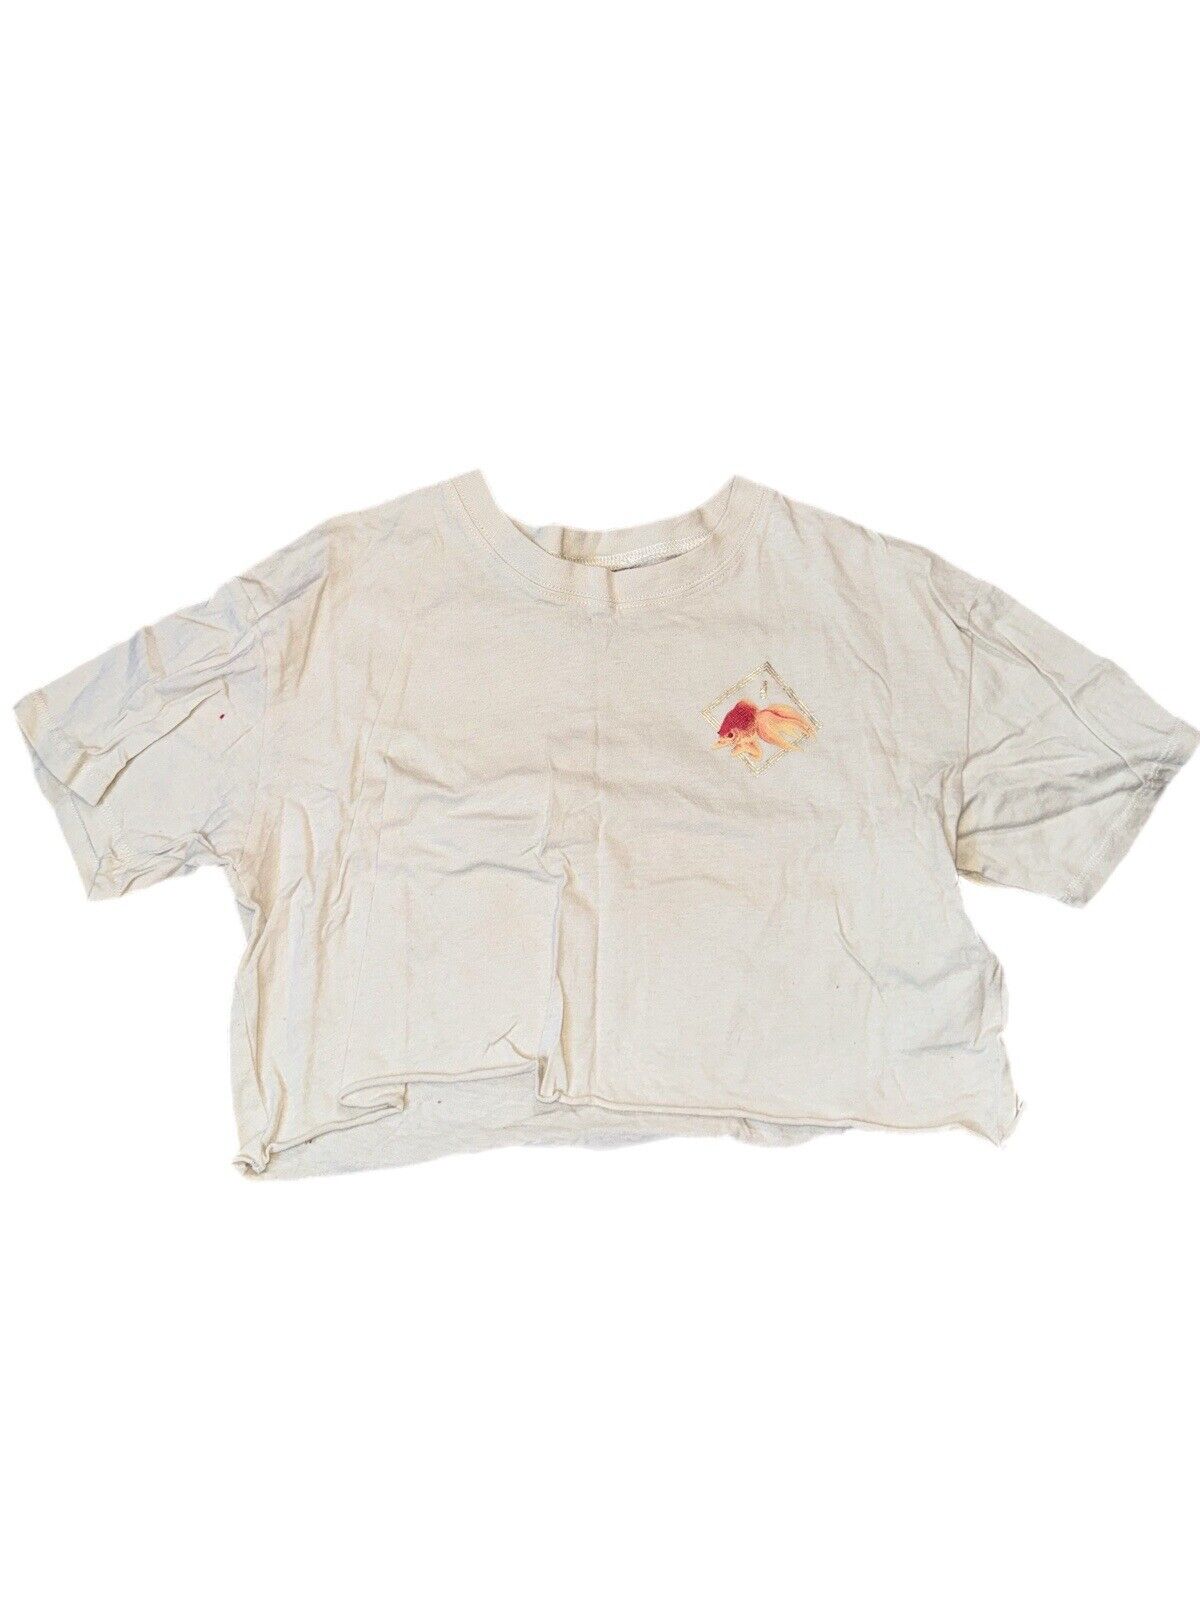 Women’s EMPYRE XS Cropped Eggshell Top With Gold Fish Print 